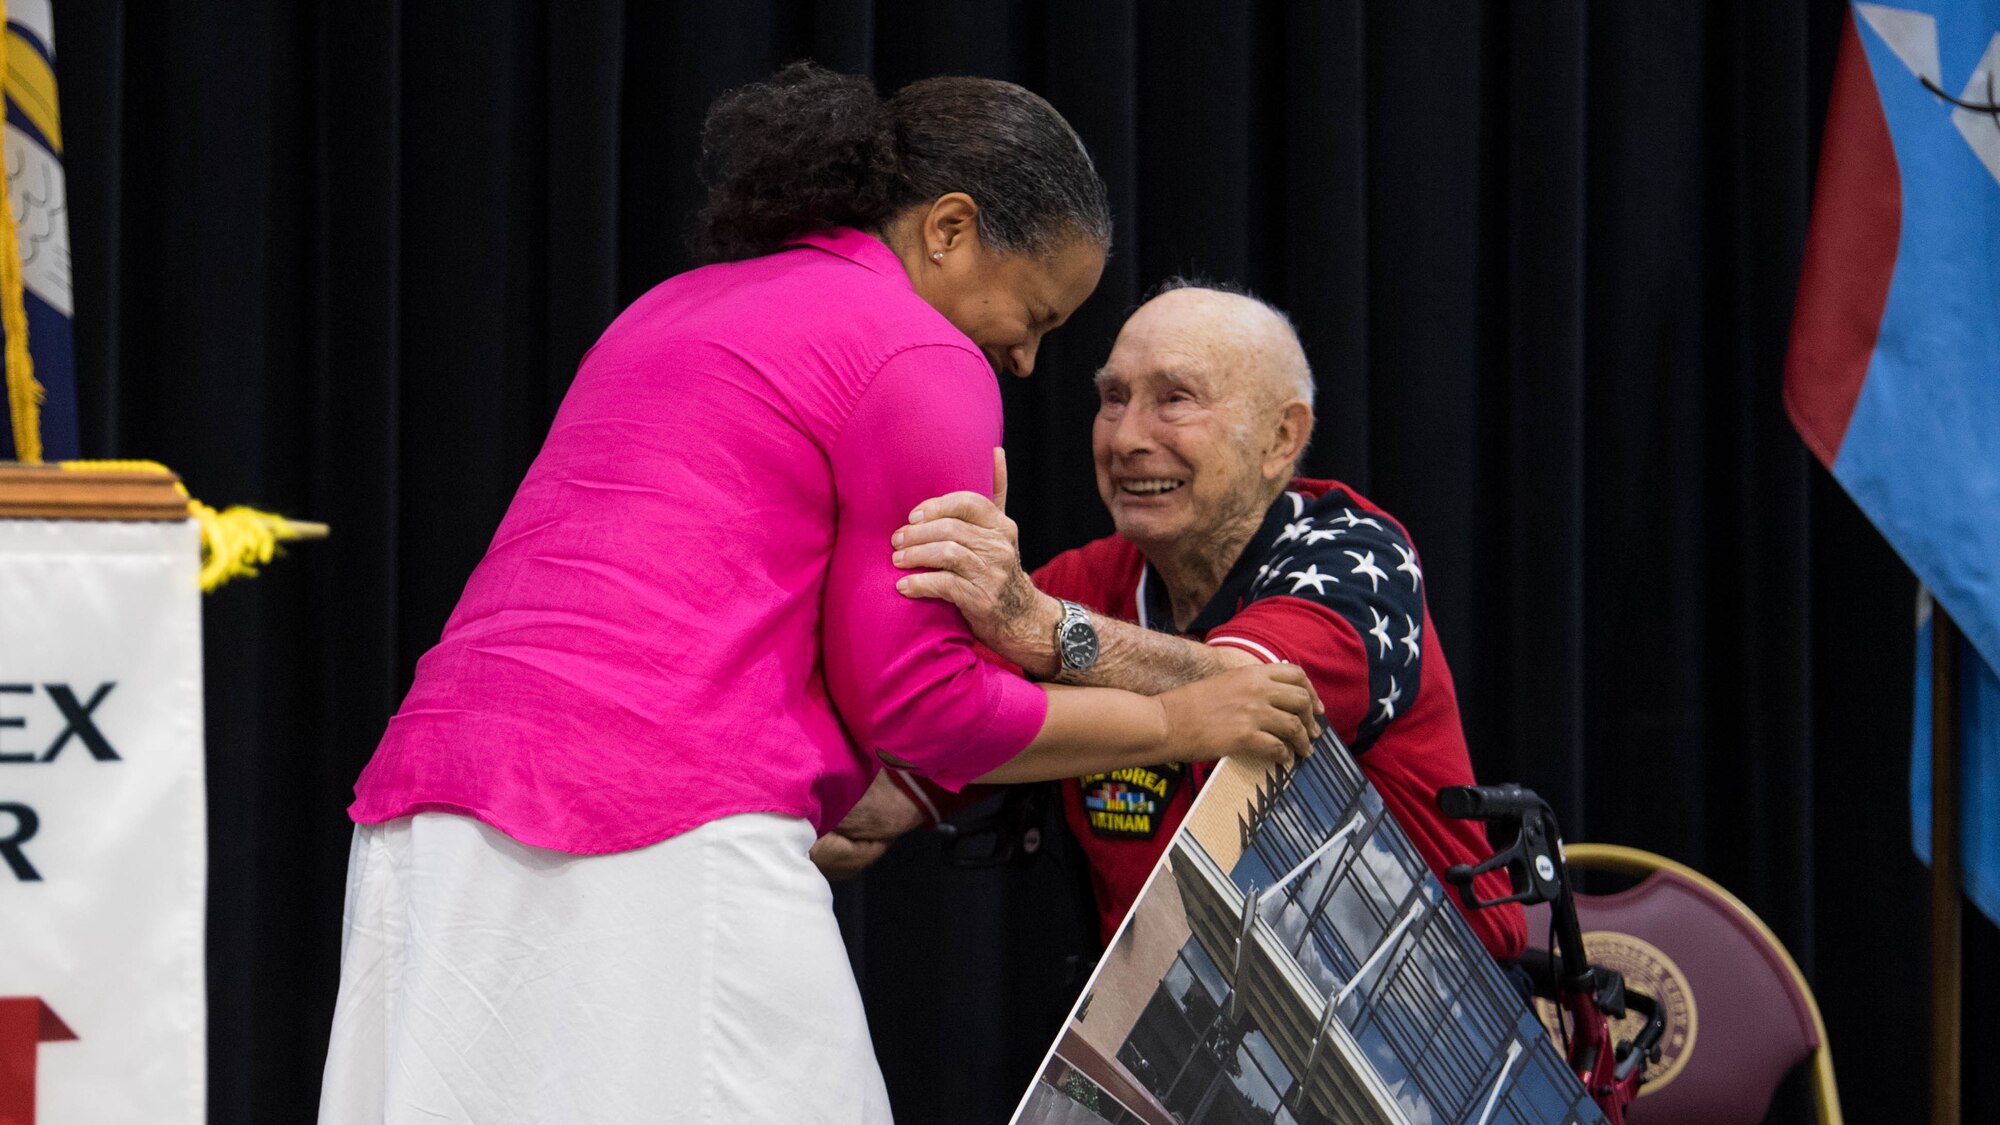 Col. Sara A. Custer (left), 2nd Mission Support Group commander, announces to  retired Col. Steven L. dePyssler (right), 2nd MSG retiree affairs director, and the attendees of his 100th birthday celebration that the 2nd MSG  building is  renamed after dePyssler at the Bossier Civic Center, Bossier City, Louisiana, July 19, 2019.  The building will now be called the dePyssler Mission Support Group Building.  (U.S. Air Force photo by Airman Jacob B. Wrightsman)